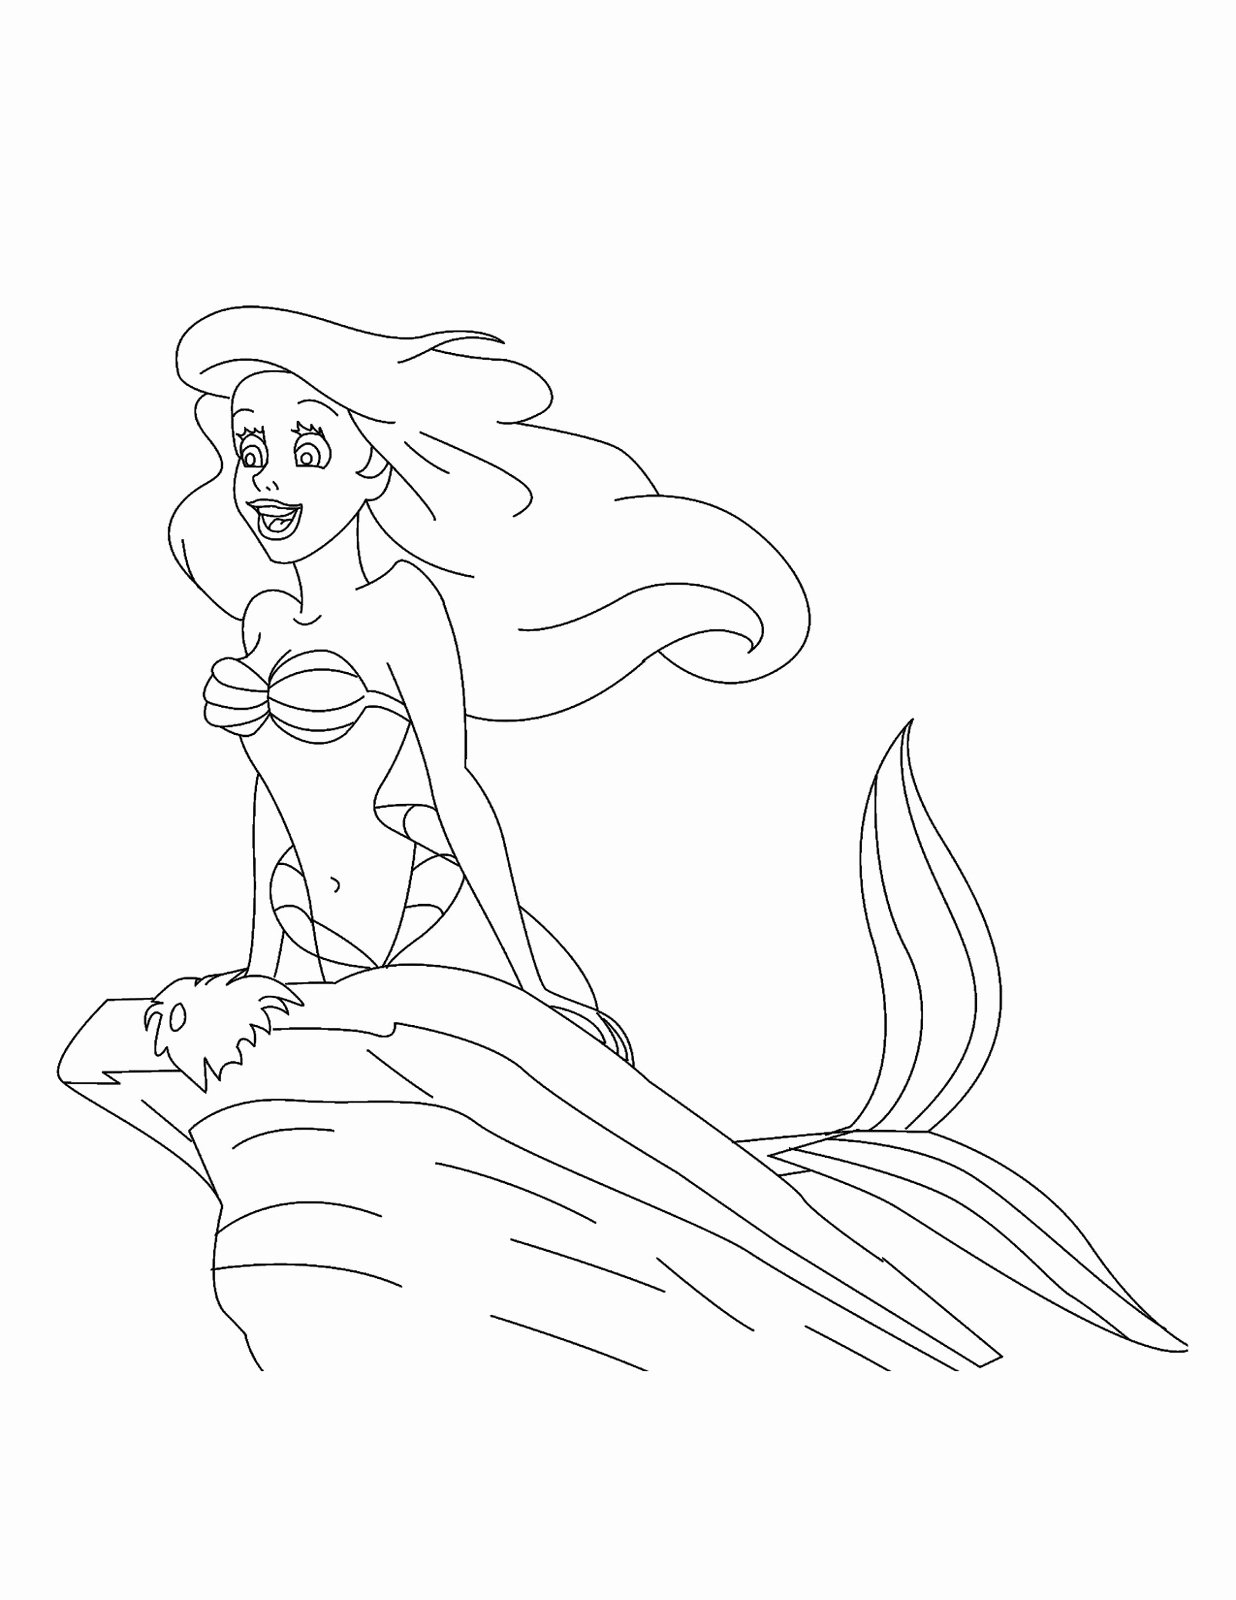 Realistic Mermaid Coloring Pages Beautiful Free Printable Little Mermaid Coloring Pages for Kids